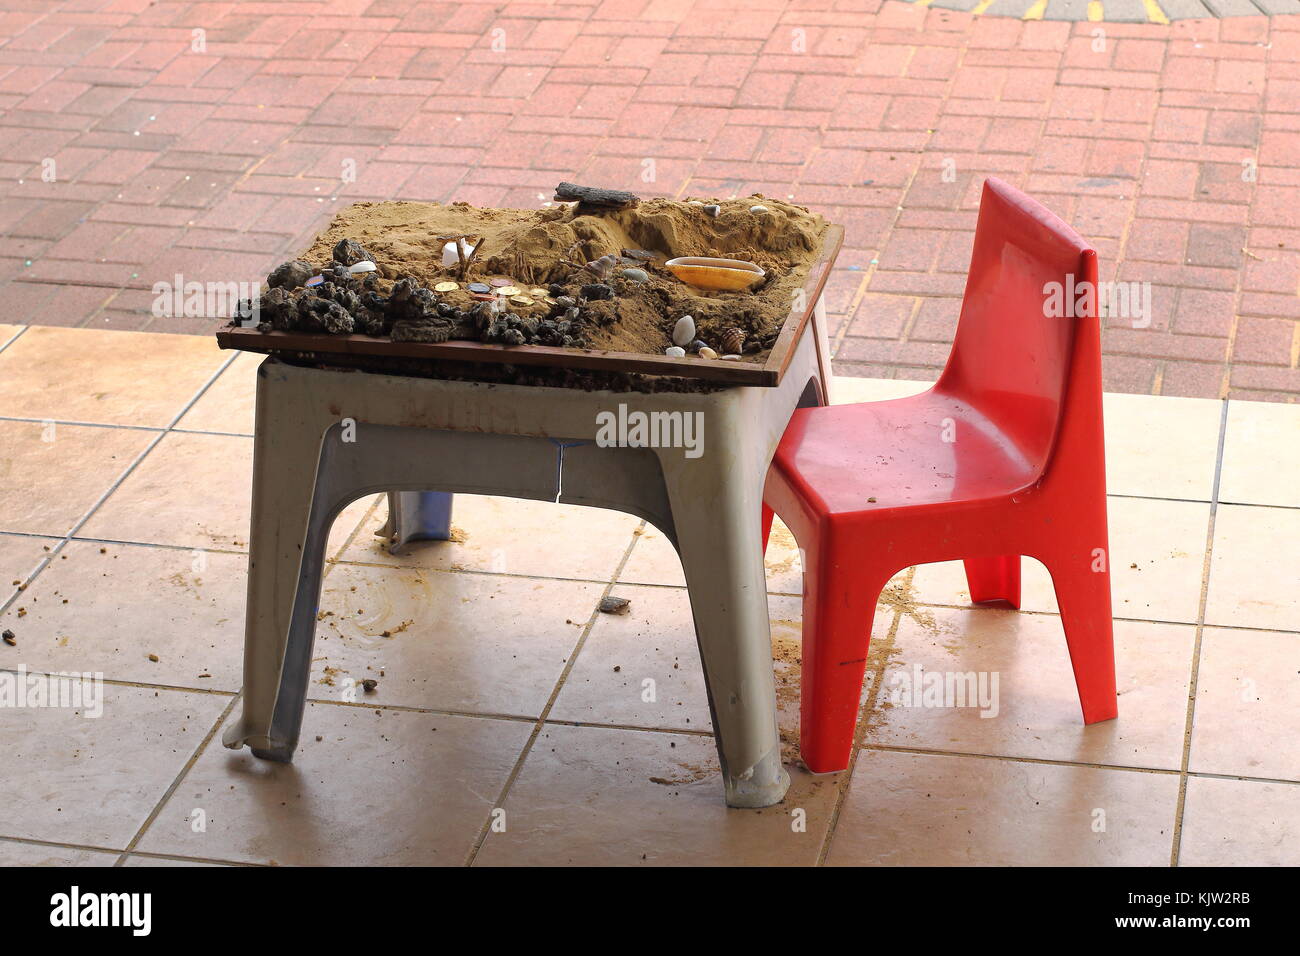 A child's small sand pit on a small table and a small red chair with sand, stones, lids and shells in landscape format with copy space Stock Photo